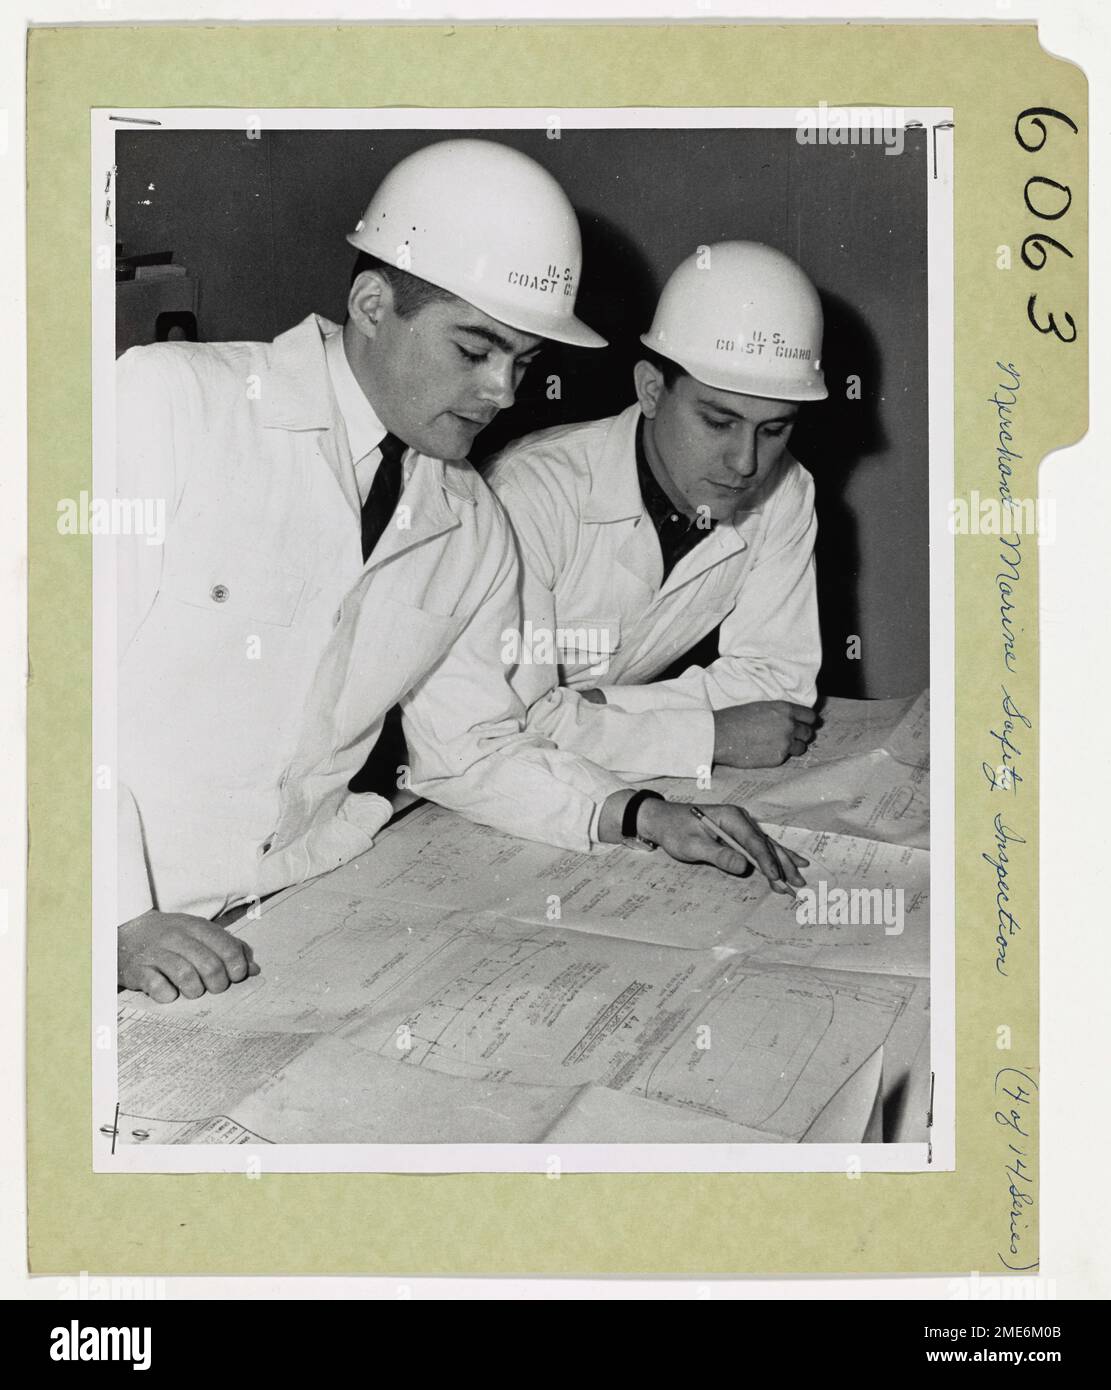 Preventing Sea Disasters in the Coast Guard's Business. Coast Guard marine inspectors, (left) Lieutenant Paul M. Hureau and Lieutenant Joel D. Sipes, study the plans of the newly built Grace Line passenger and cargo ship SS Santa Mercedes before boarding for inspection of her fittings while she is still in dry-dock at the Bethlehem Steel Shipyard at Sparrows Pt., Baltimore, Md. Stock Photo